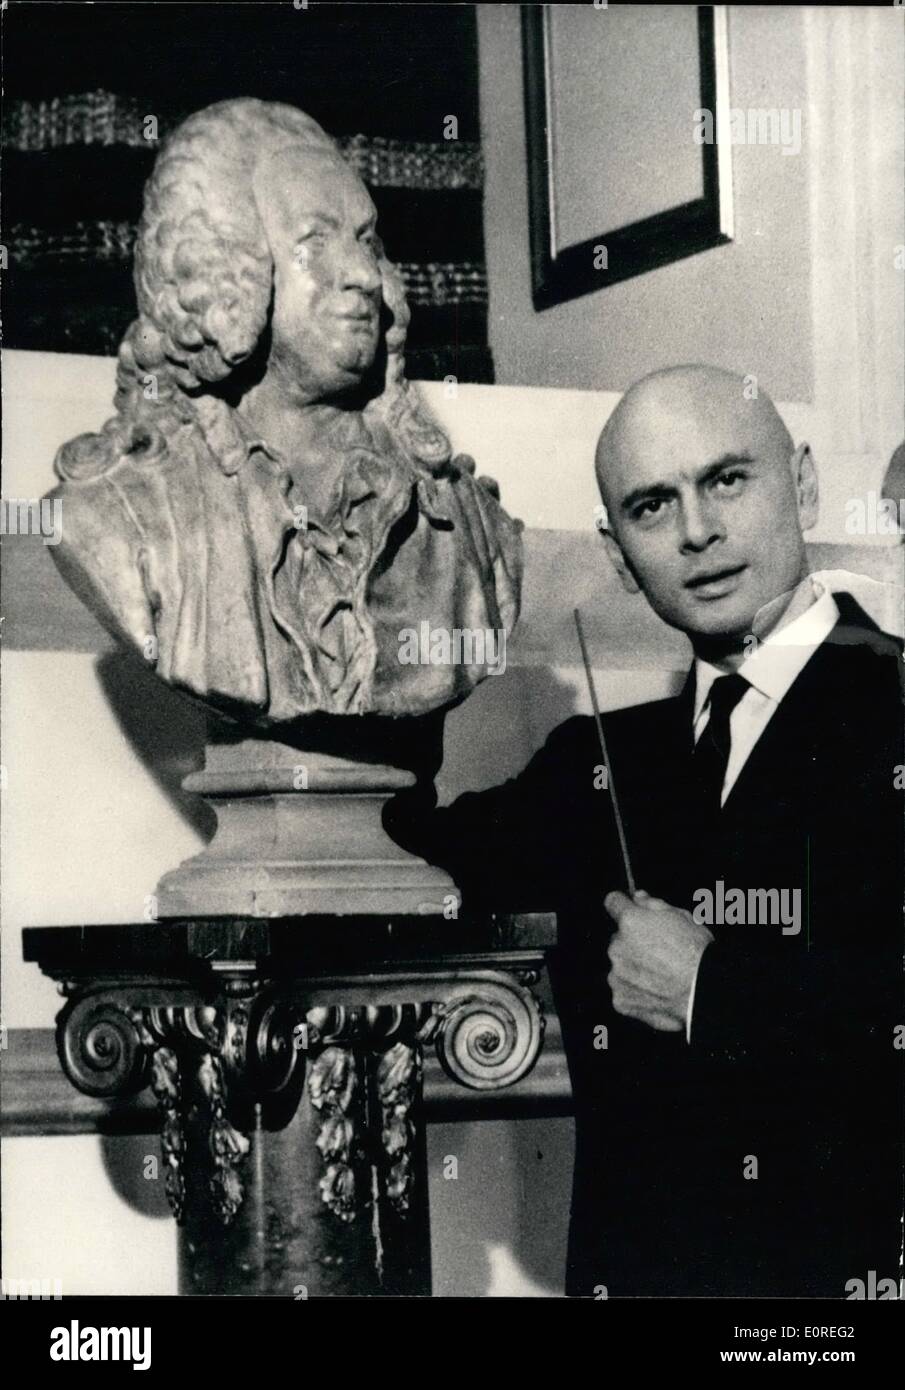 Apr. 04, 1959 - Yule Brynner as a conductor: The famous American actor Yul Brynner is in Paris now for the filming of ''Once more with feeling'', produced and directed by Stanley Donen. IN this film, Yul Brynner plays the part of a Conductor. photo shows Yul Brynner in a scene of the film. Stock Photo